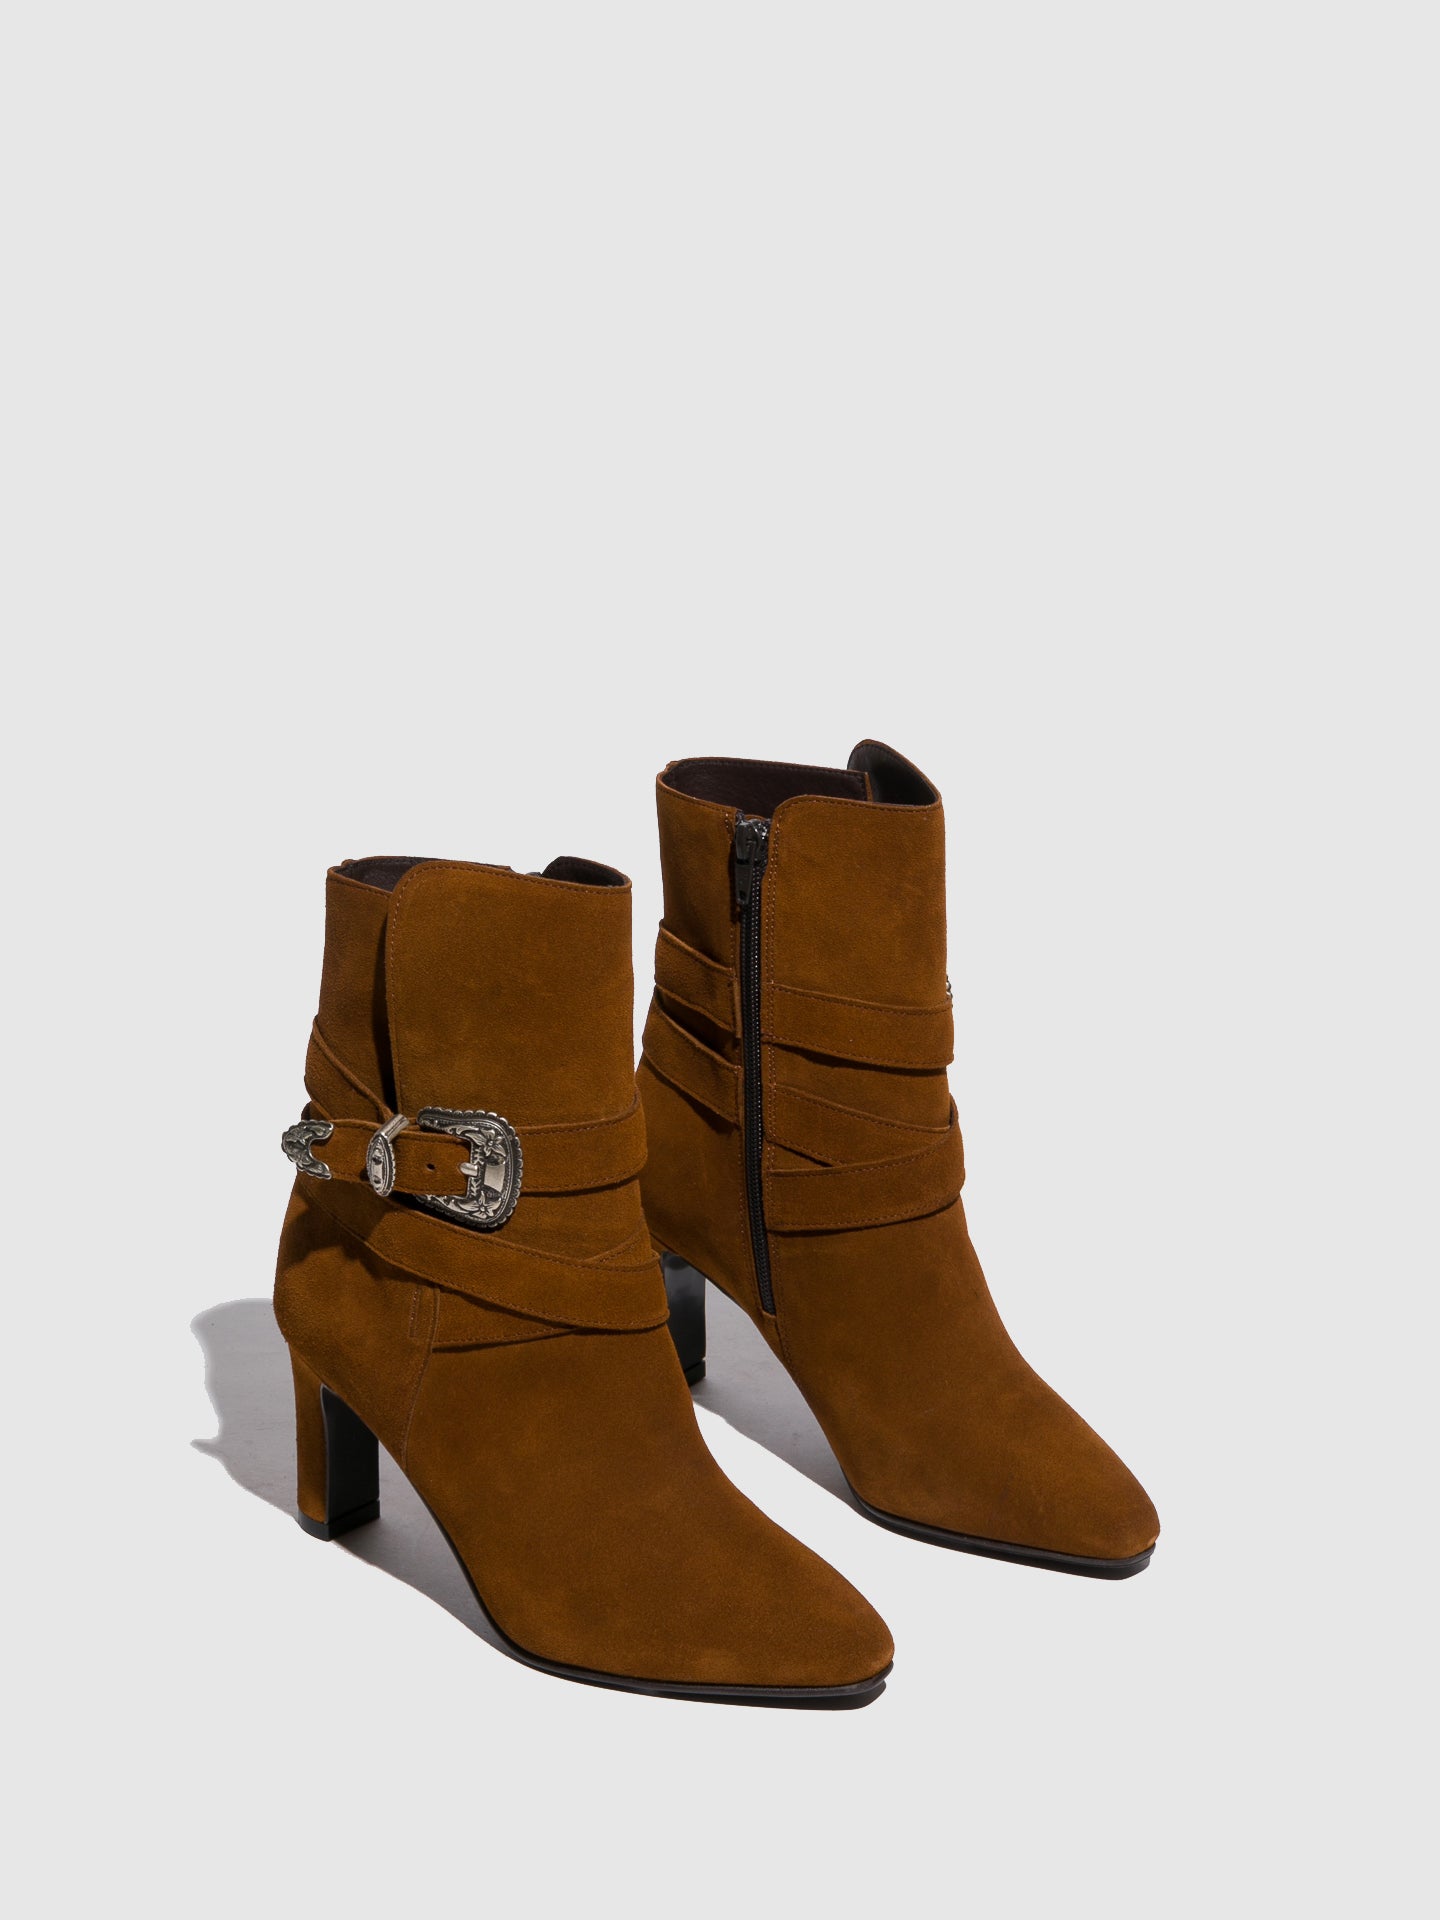 Foreva Camel Buckle Boots